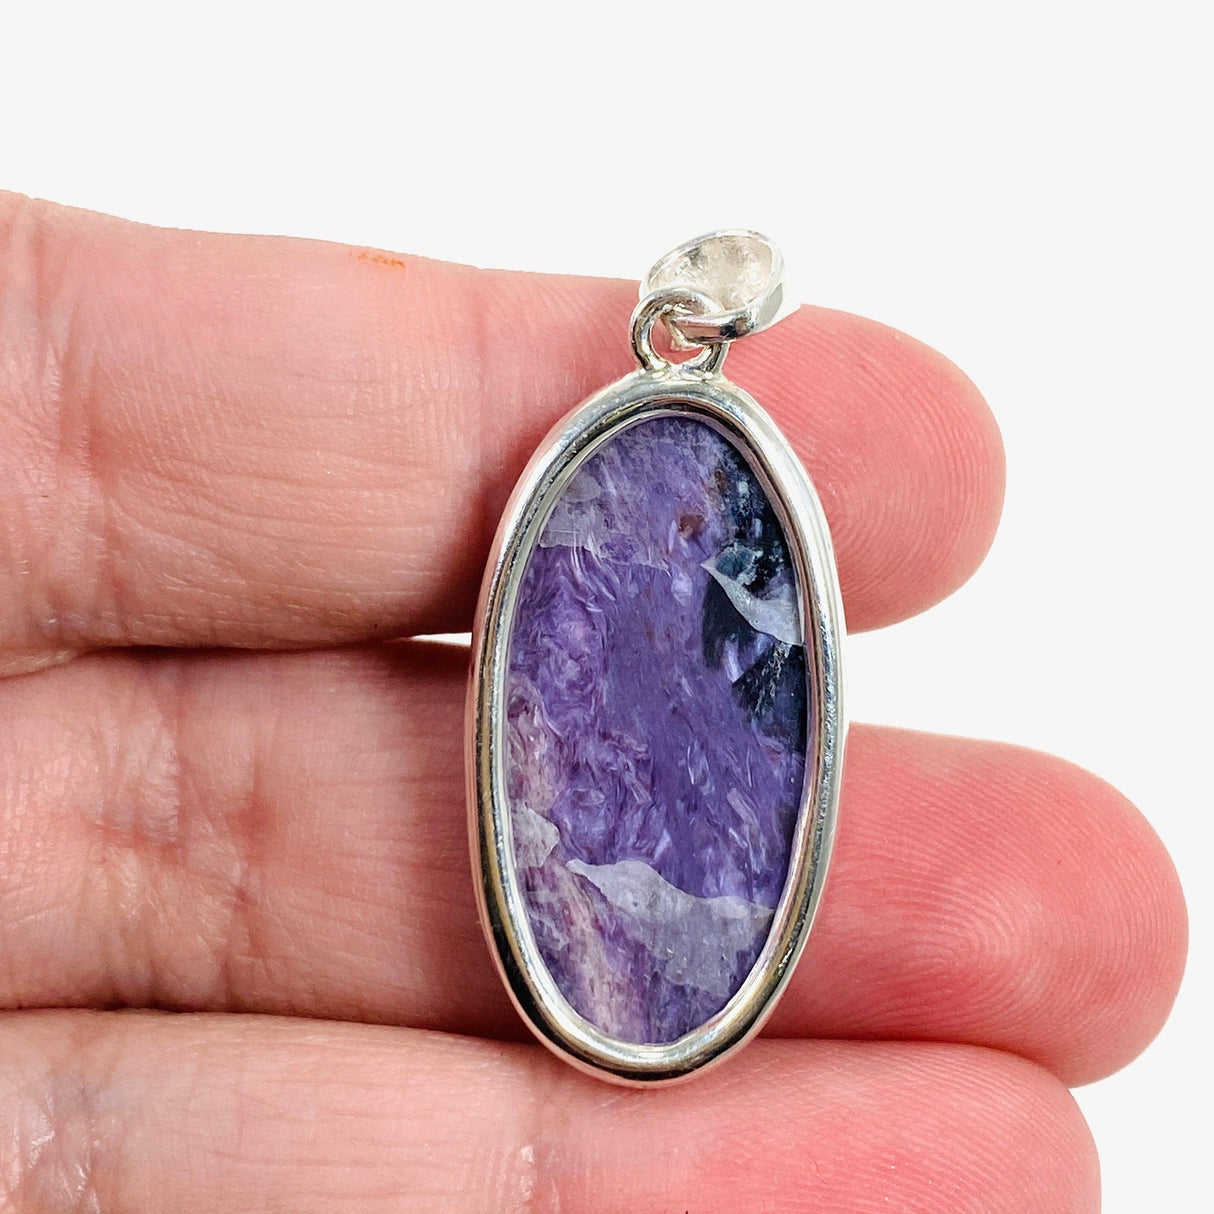 Purple Charoite oval pendant in sterling silver sitting on a hand